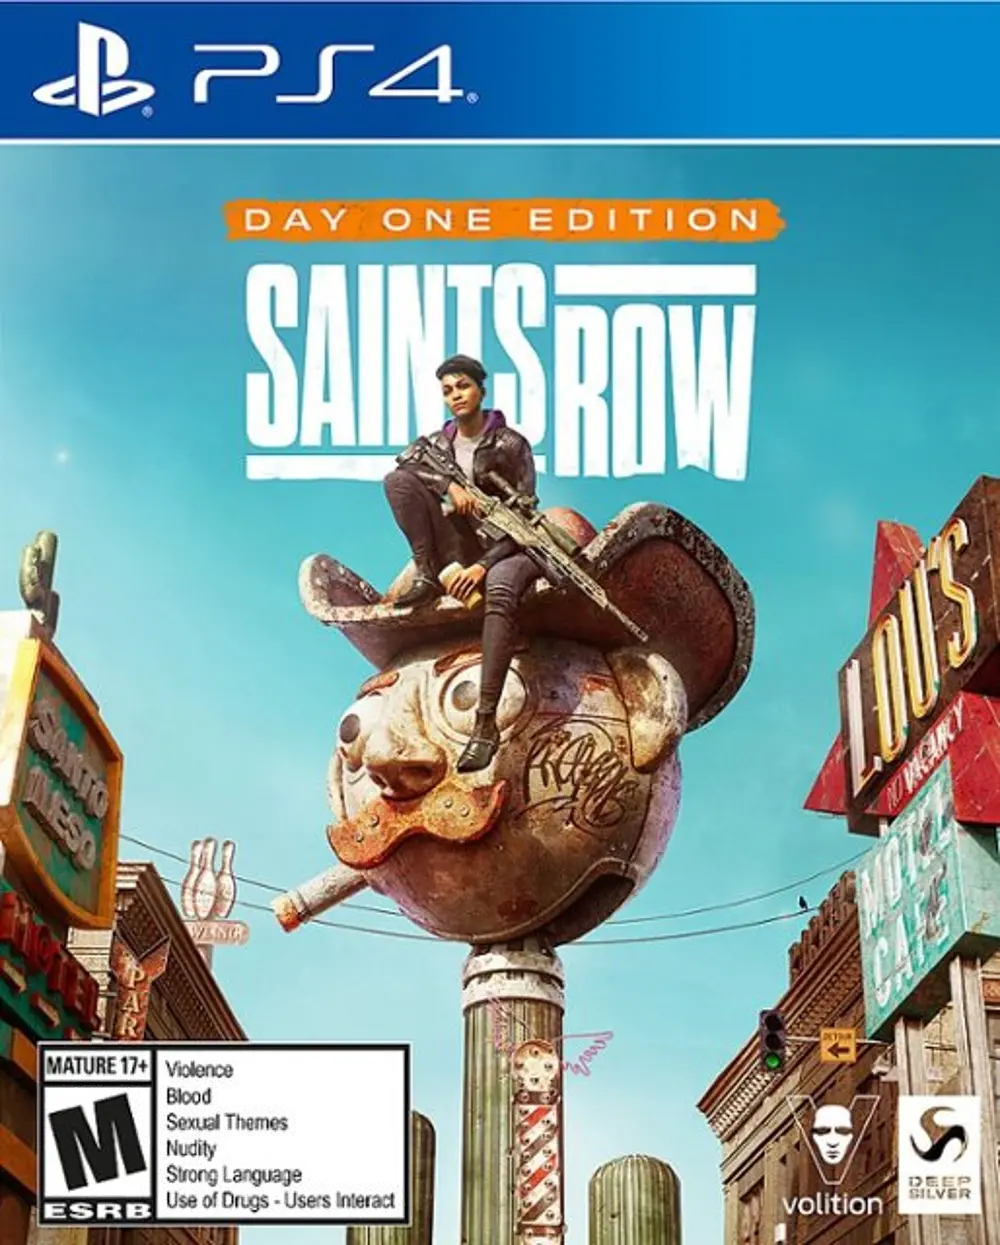 PS4/SAINTS_ROW_DAY1 Saints Row Day 1 Edition - PS4-1